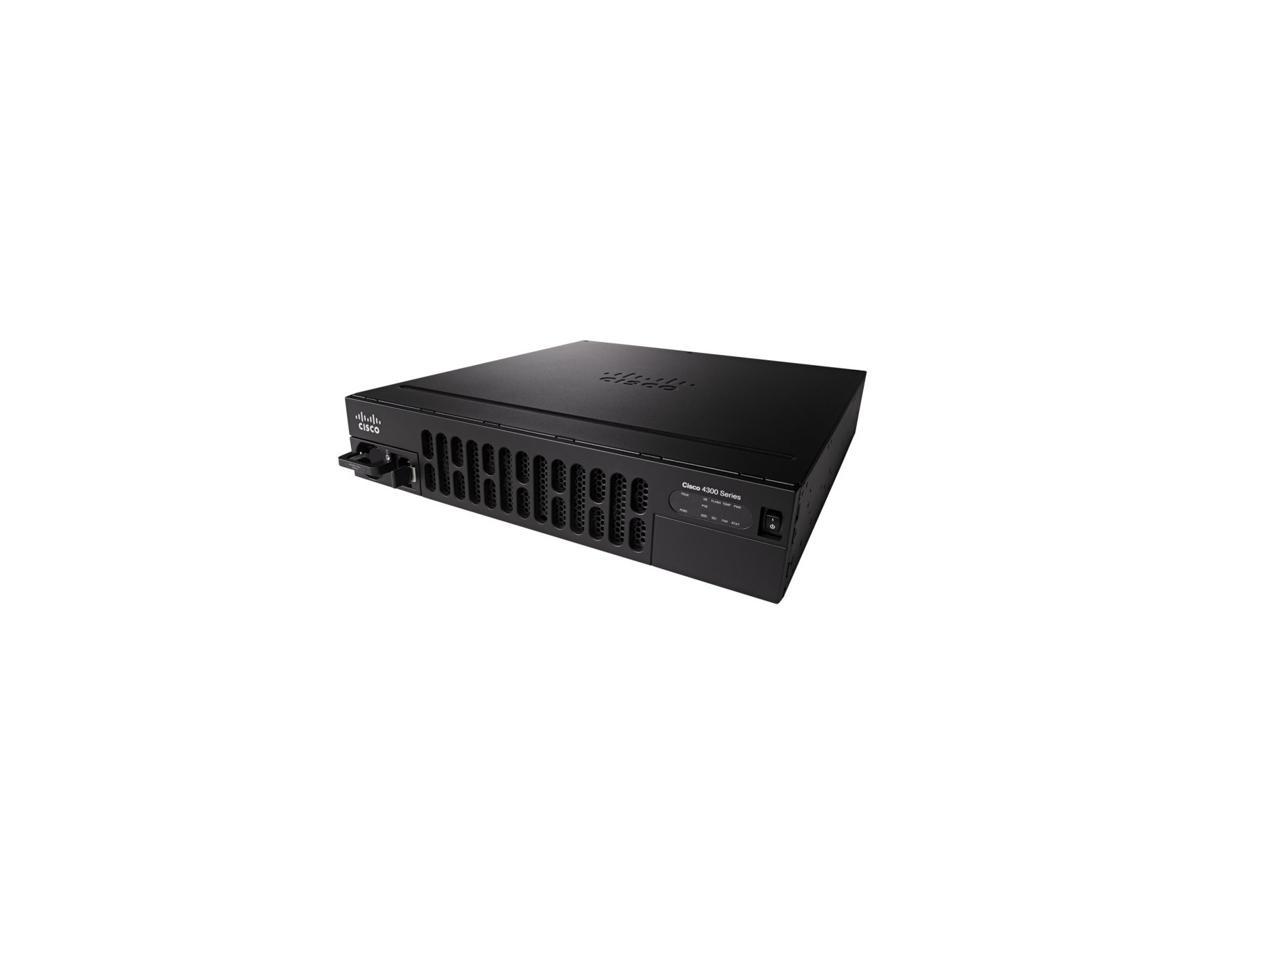 Cisco Small Business ISR4331-VSEC/K9 Router and Voice with Security (VSEC) Bundle 3 x 10/100/1000Mbps LAN Ports